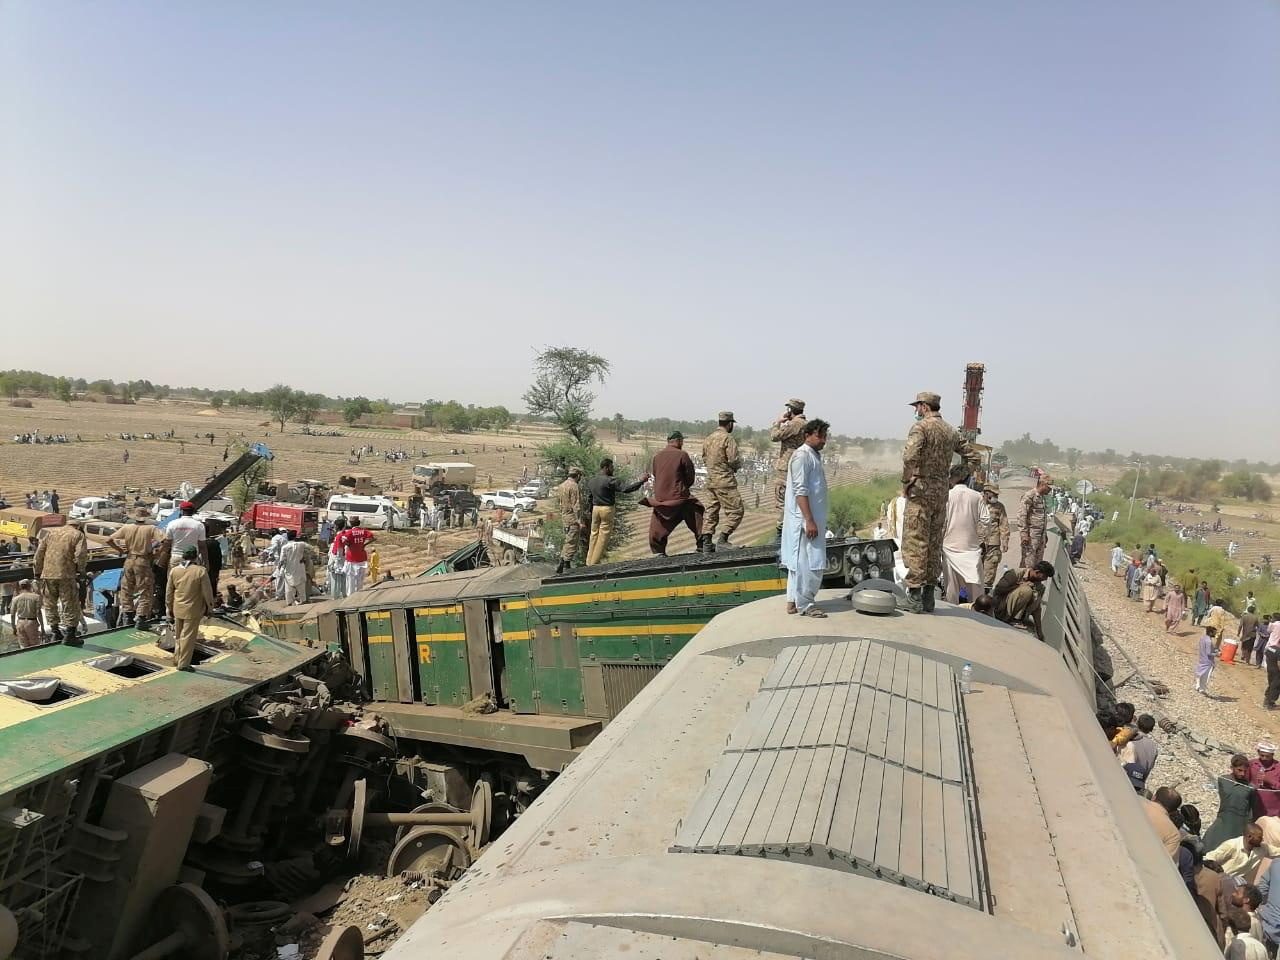 Pakistani train smashes into derailed carriages, 36 killed